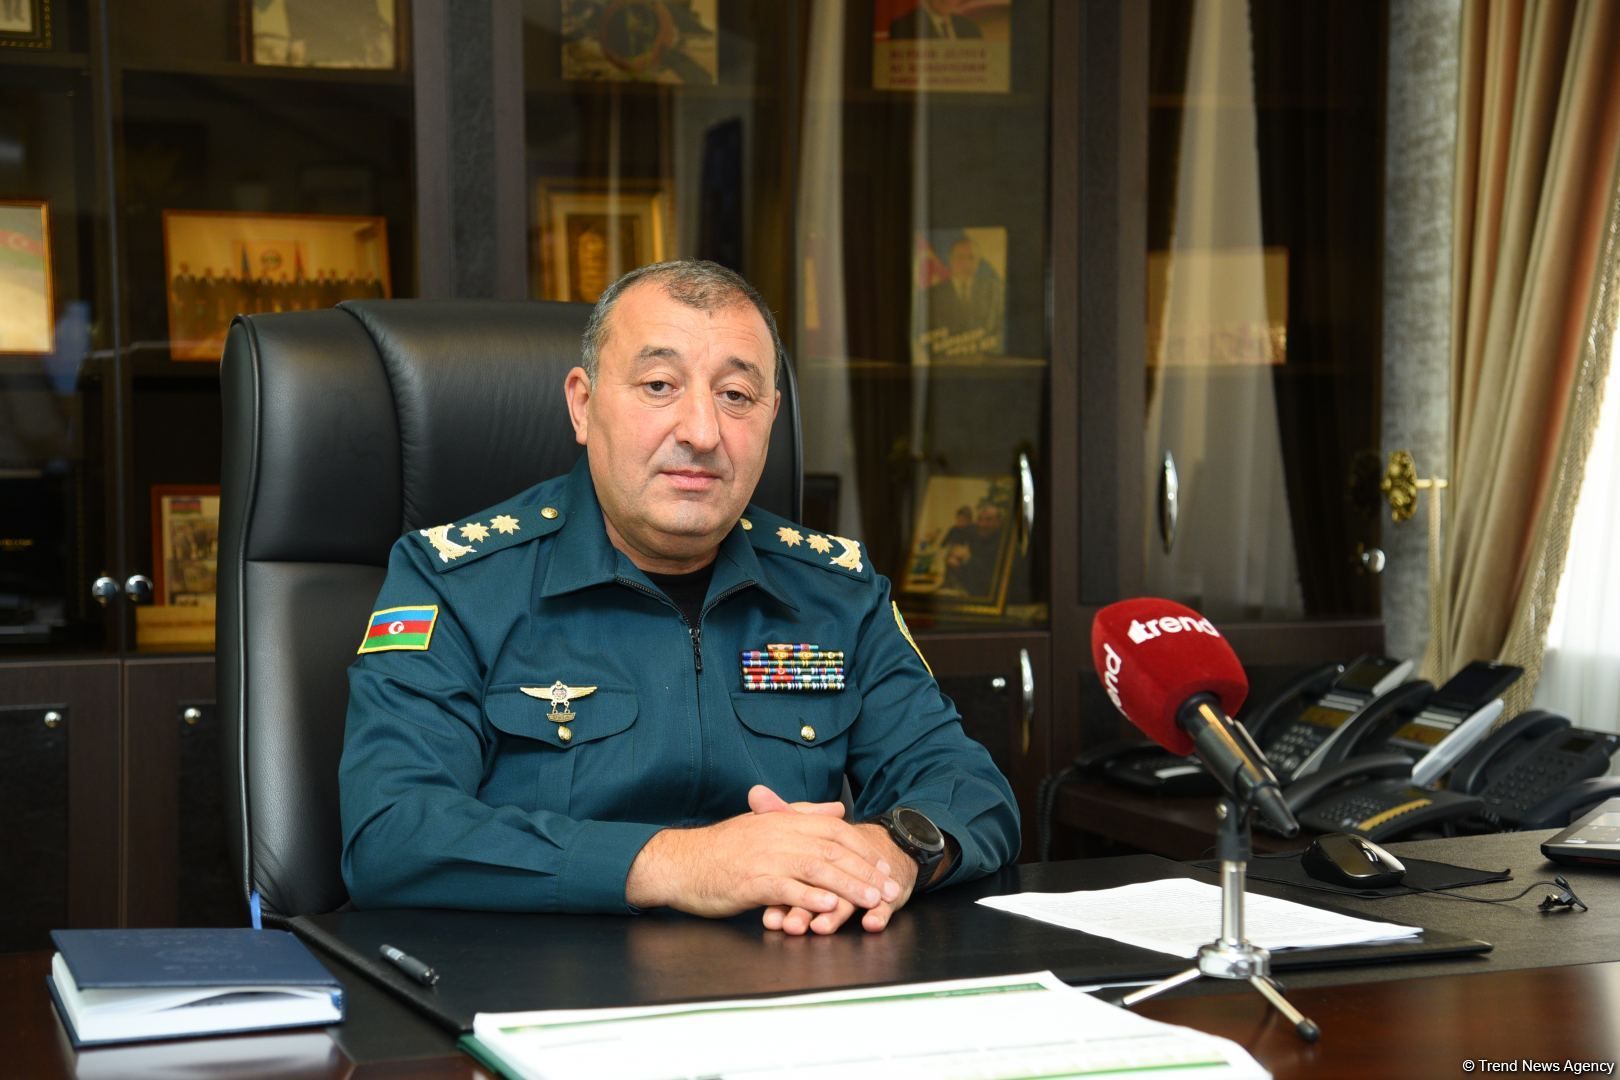 All achievements of Azerbaijani border guards are result of highest attention and care of President Ilham Aliyev - deputy head of State Border Service [PHOTO]